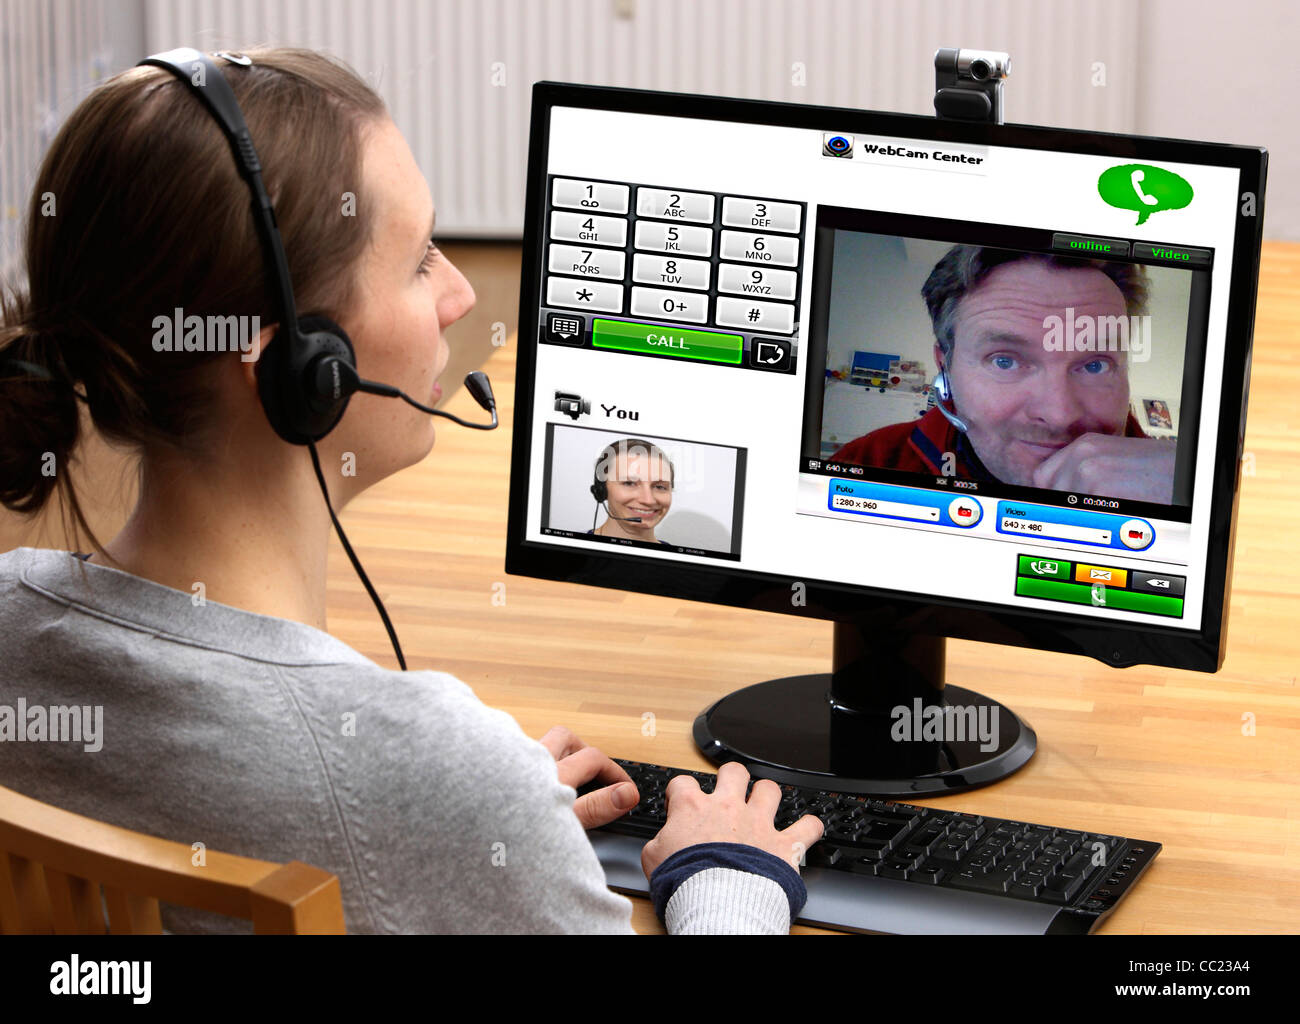 Two People Talking Over The Internet Video Chat With With Web